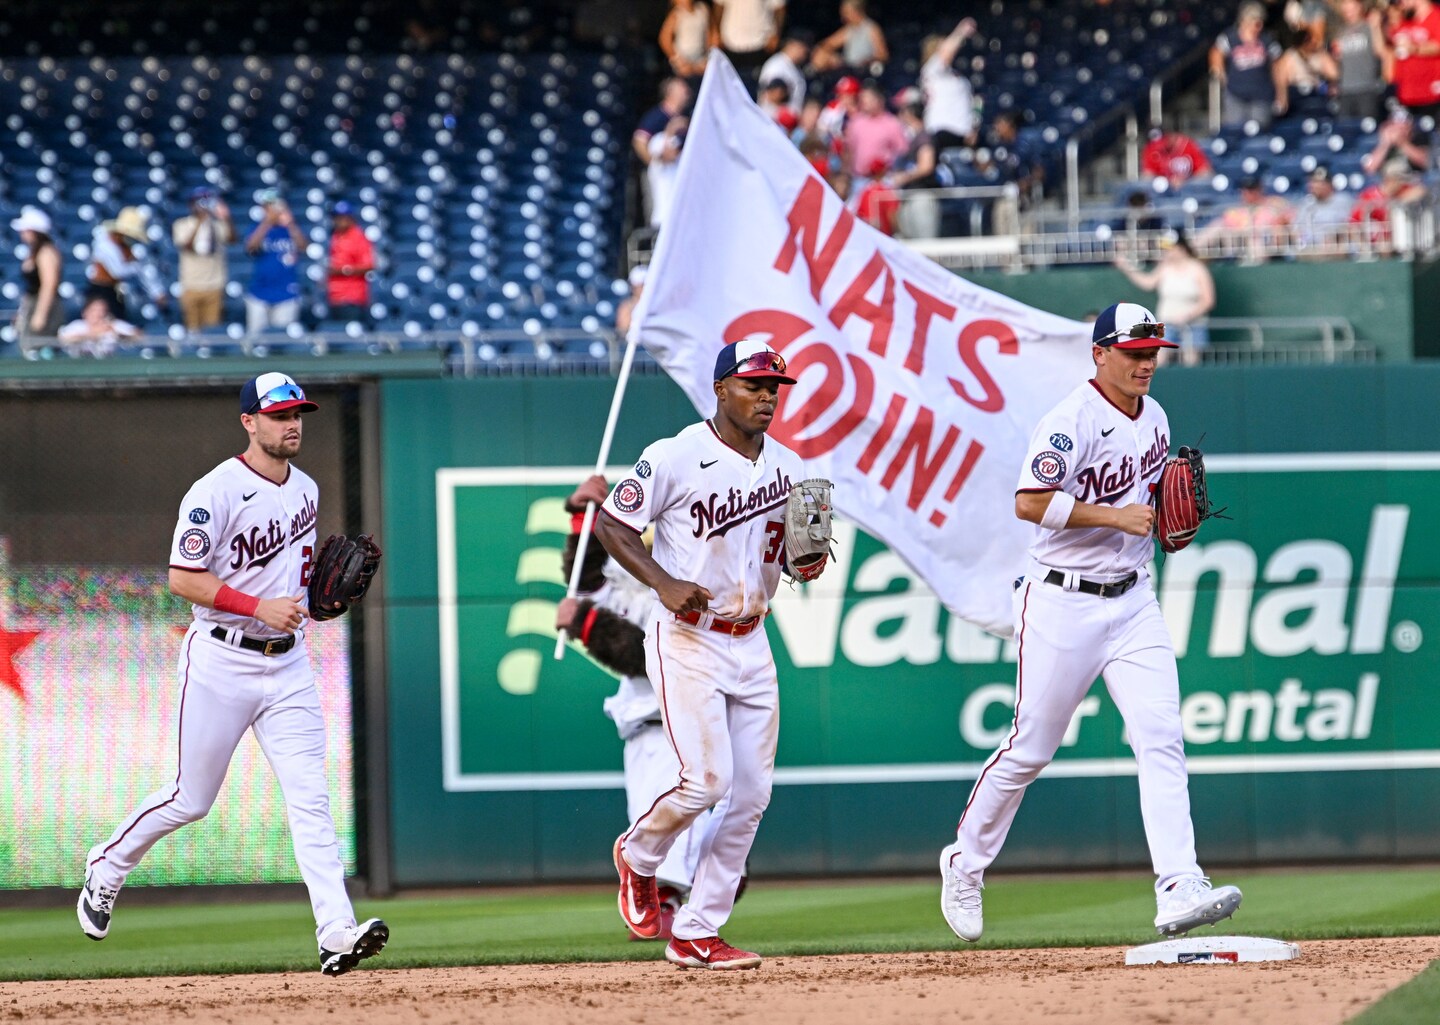 Nats nearly blanked again, Pros